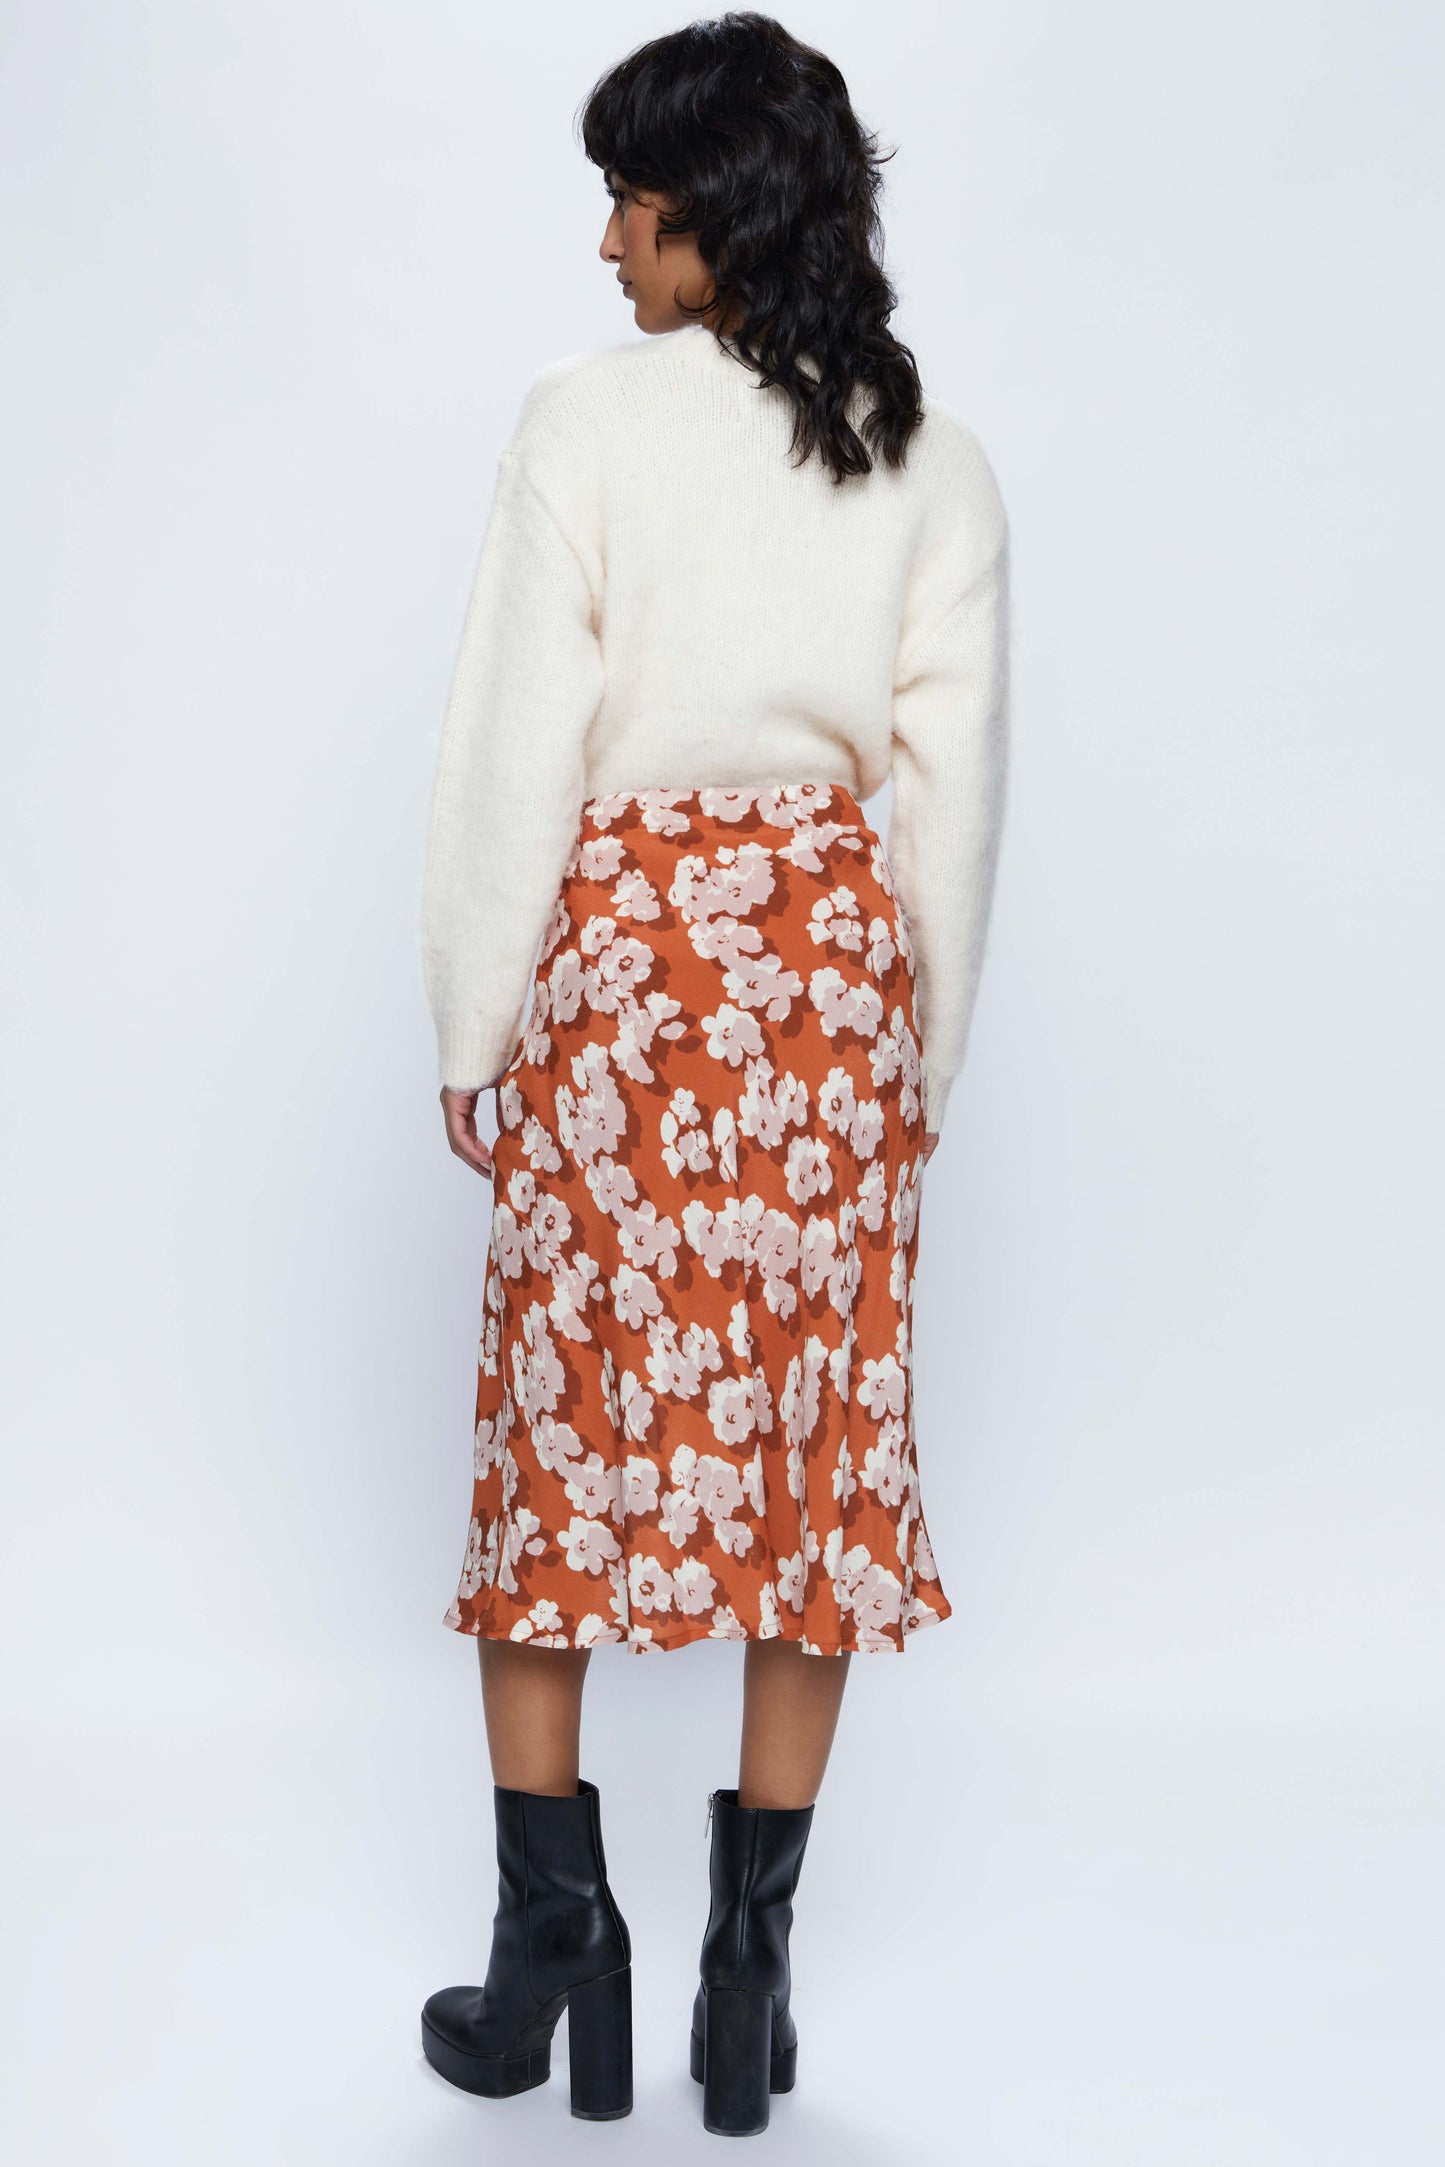 Flowy midi skirt with floral print